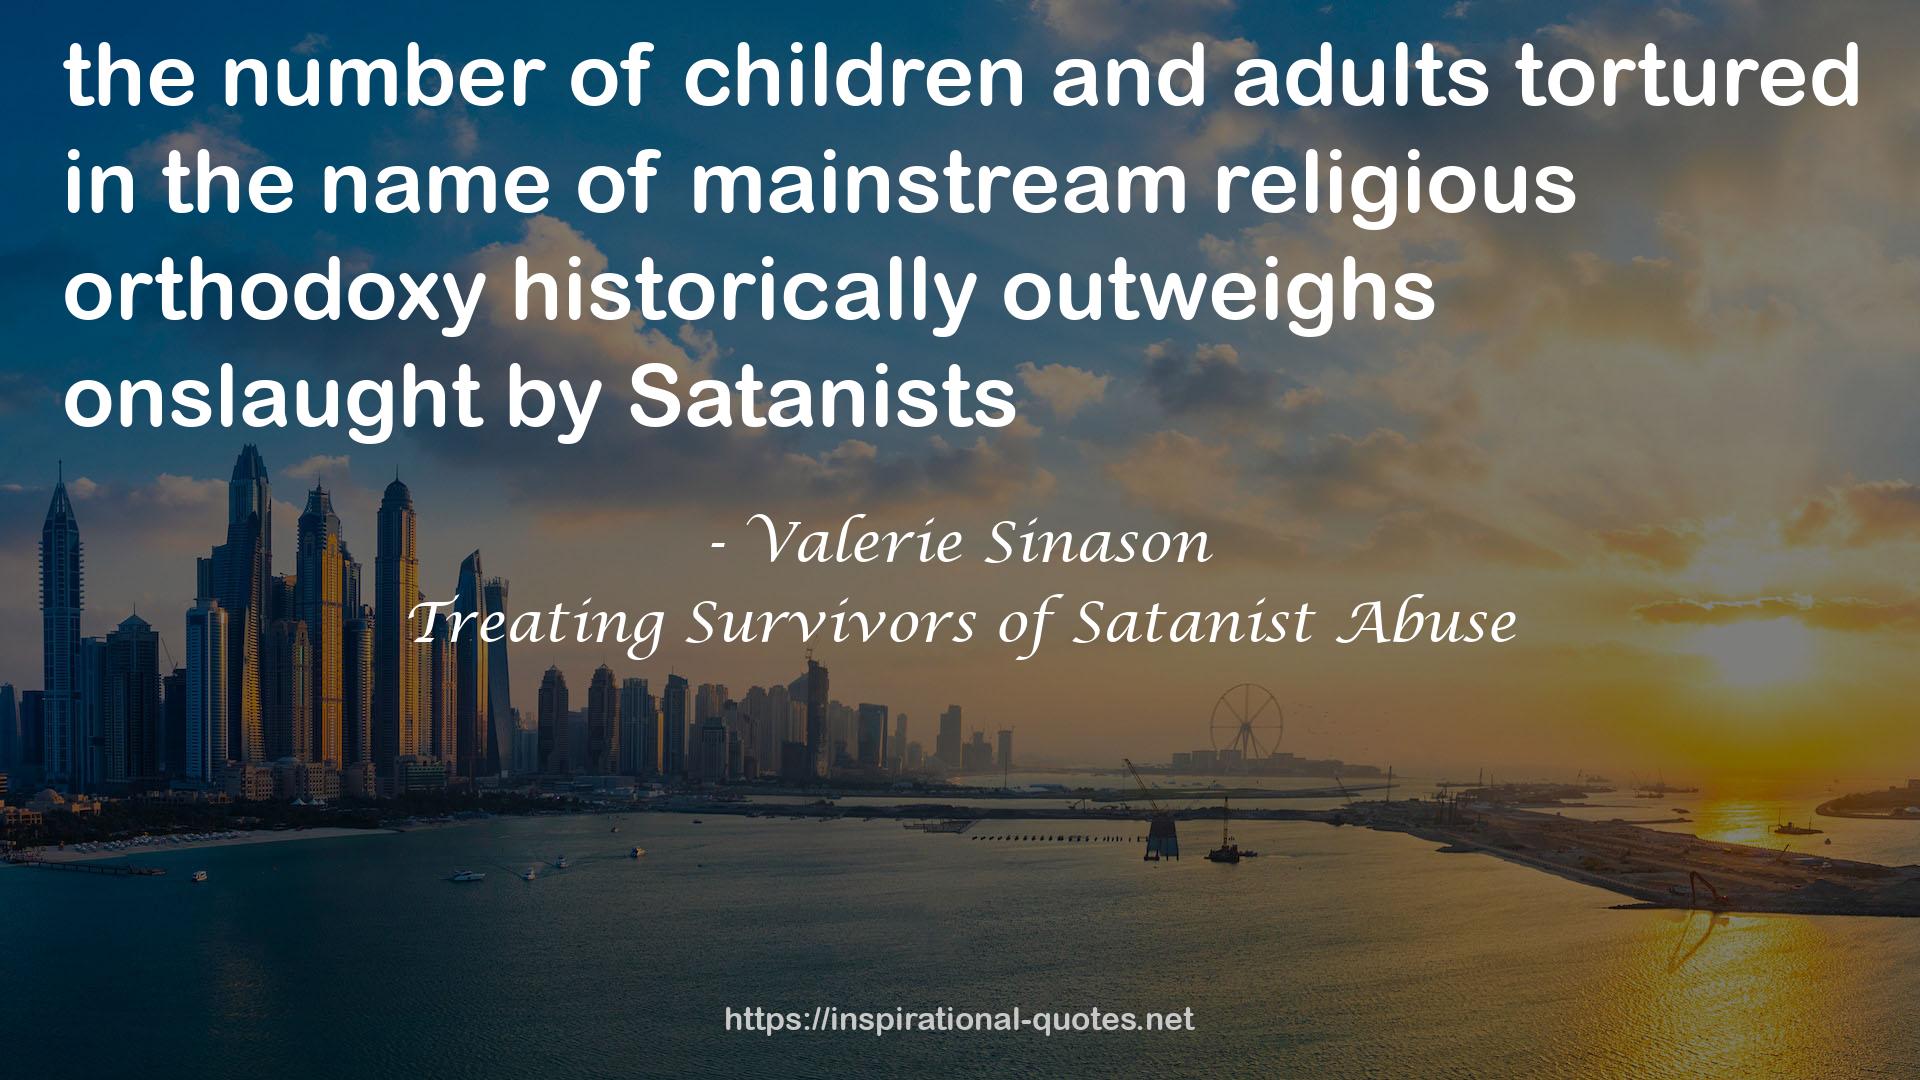 Treating Survivors of Satanist Abuse QUOTES